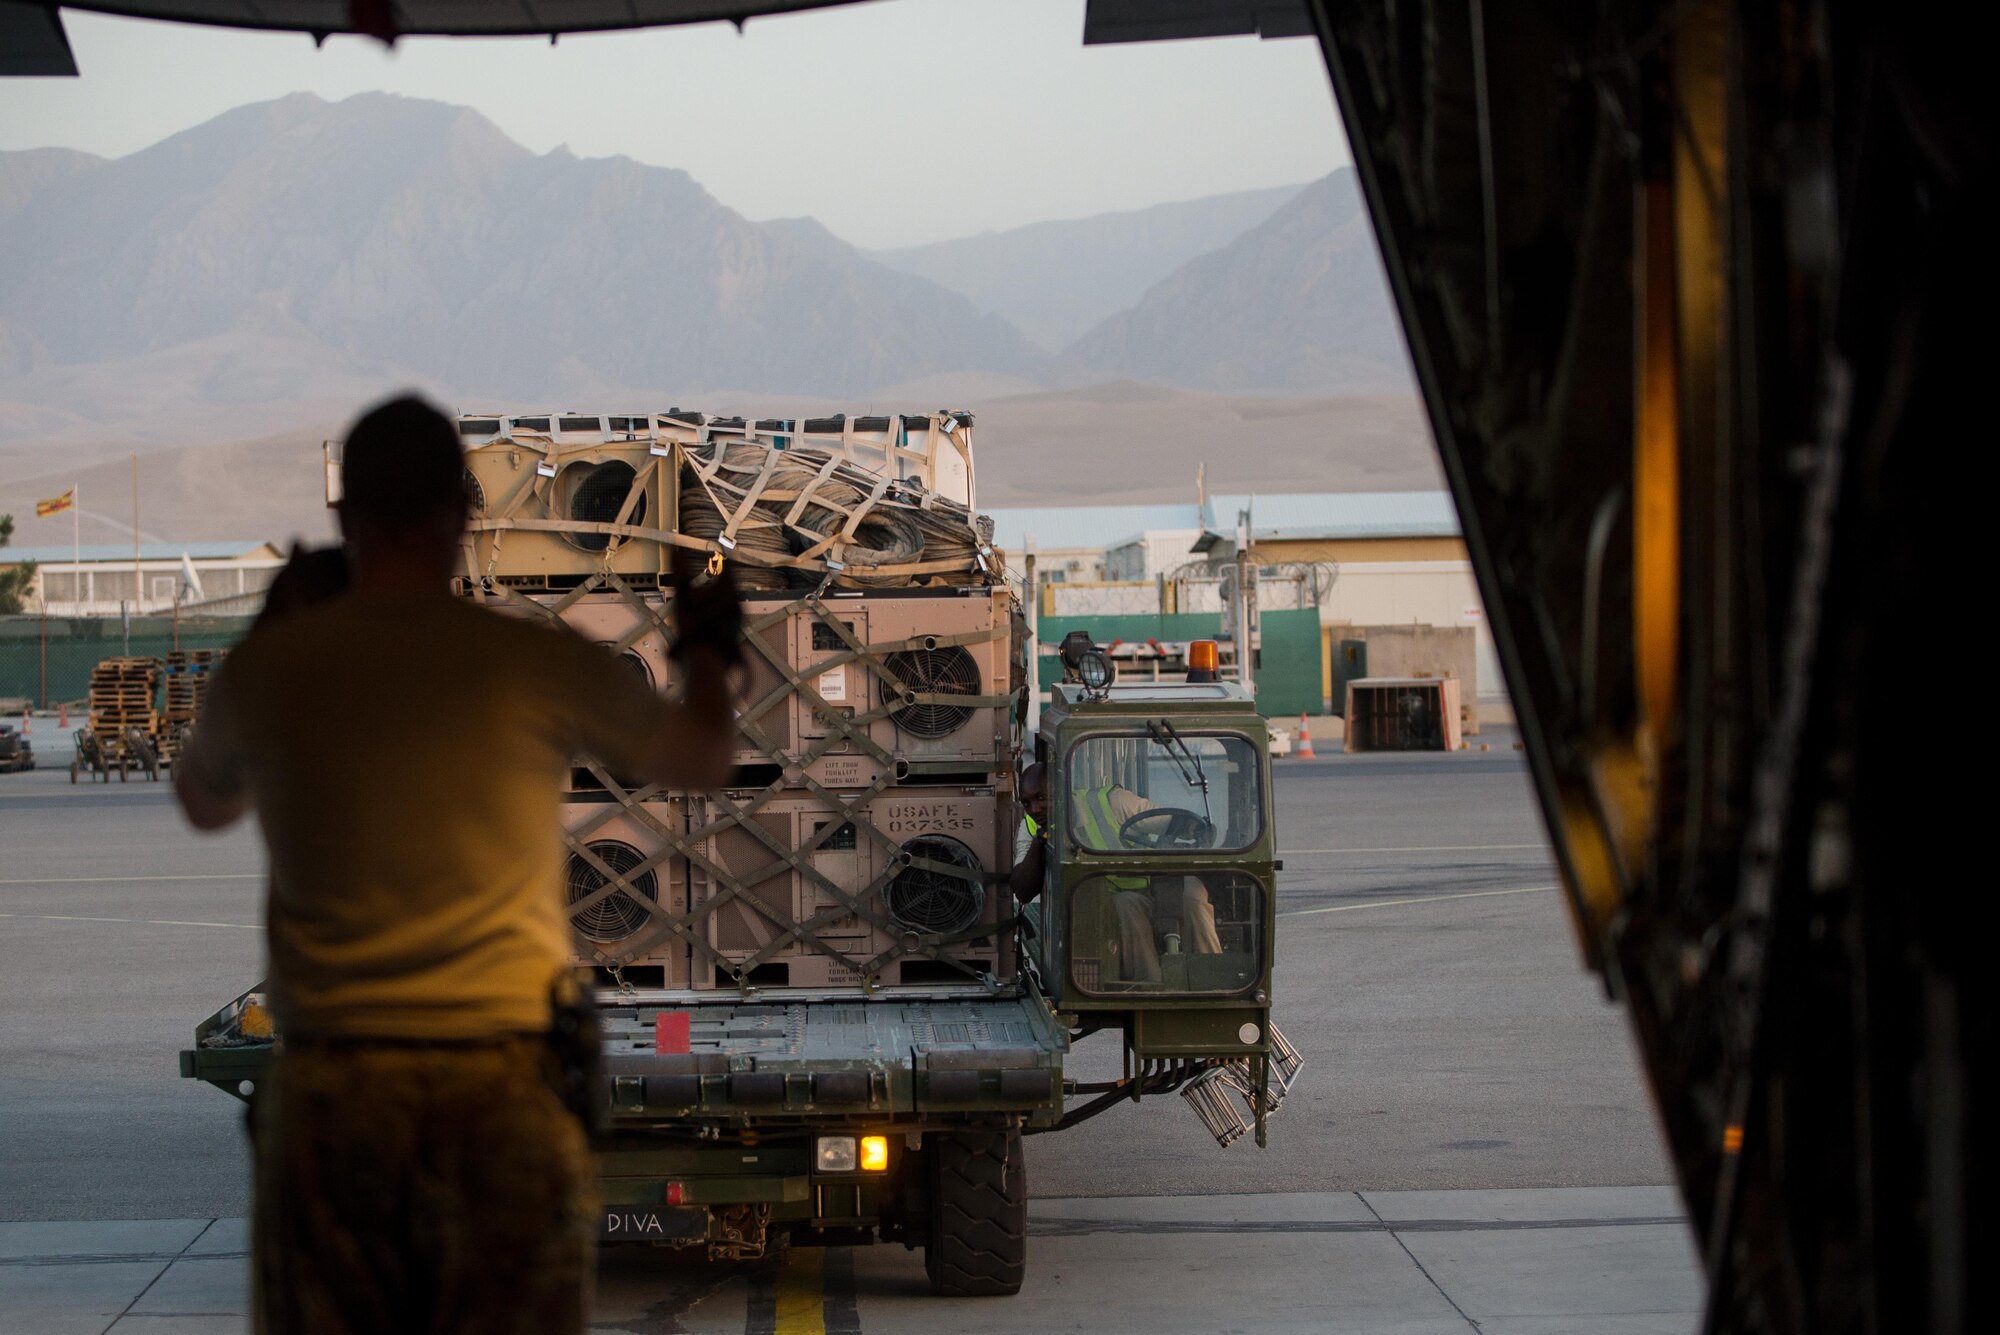 A U.S. Airman assigned to the 774th Expeditionary Airlift Squadron directs a K loader while loading cargo onto an Air Force C-130J Super Hercules aircraft at Mazar-e Sharif Airfield, Afghanistan, Aug 27, 2015. The aircrafts short takeoff and landing capability makes it an optimum fit for Afghanistan’s rugged terrain. (U.S. Air Force photo by Tech. Sgt. Joseph Swafford/Released)